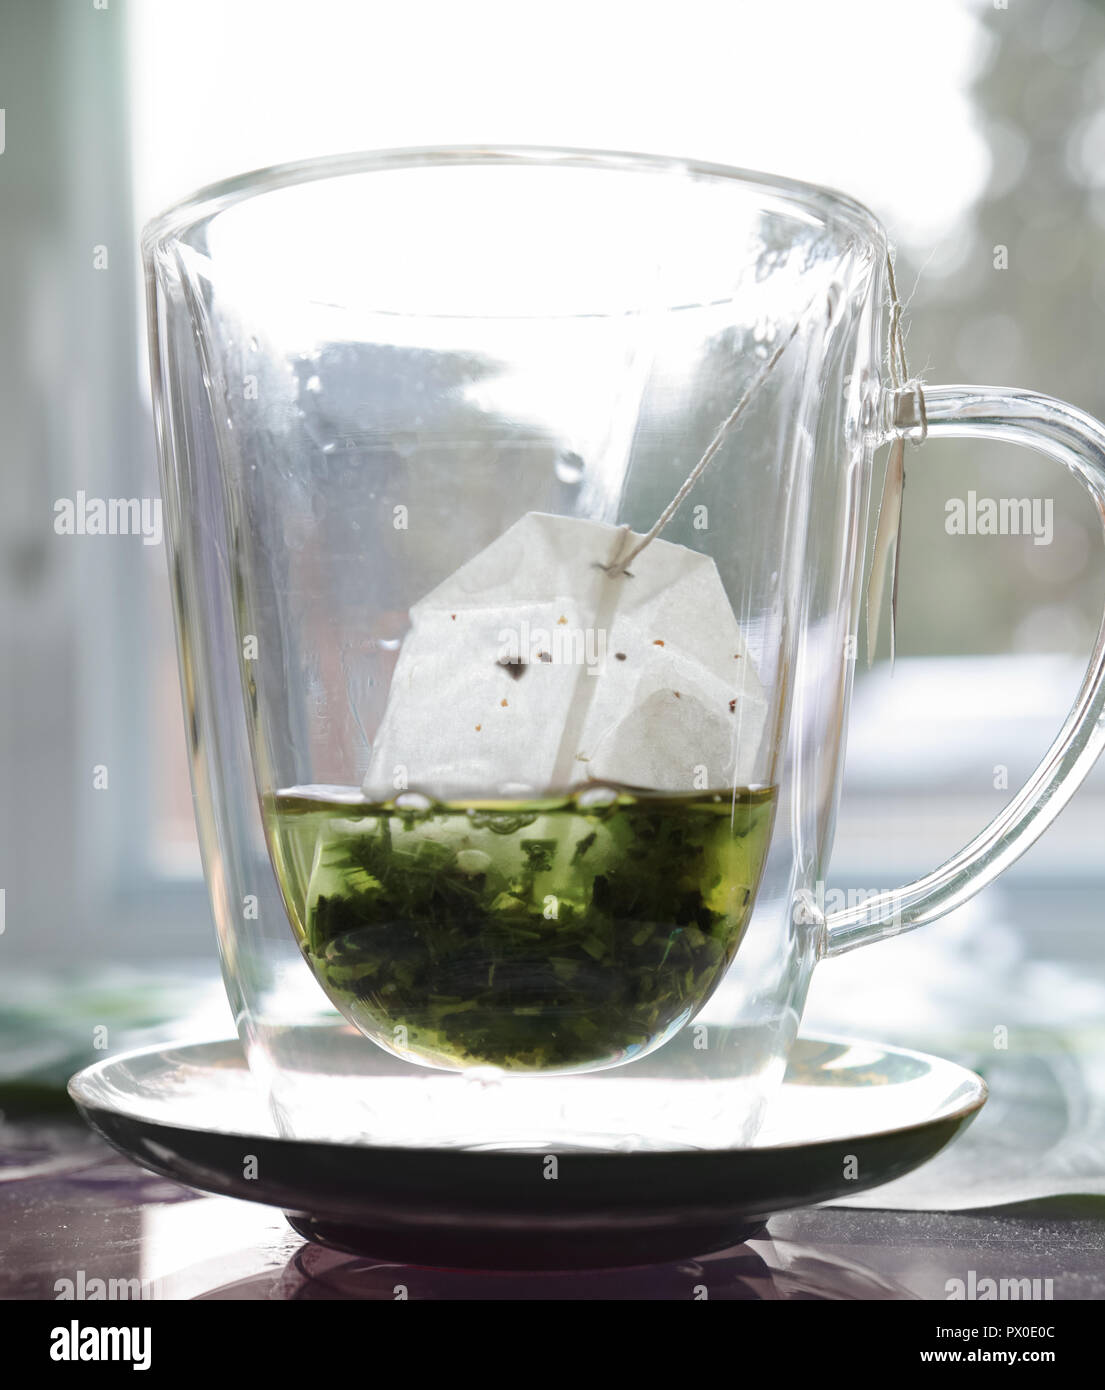 In a clear glass cup, one pours hot water over a green tea bag. Stock Photo